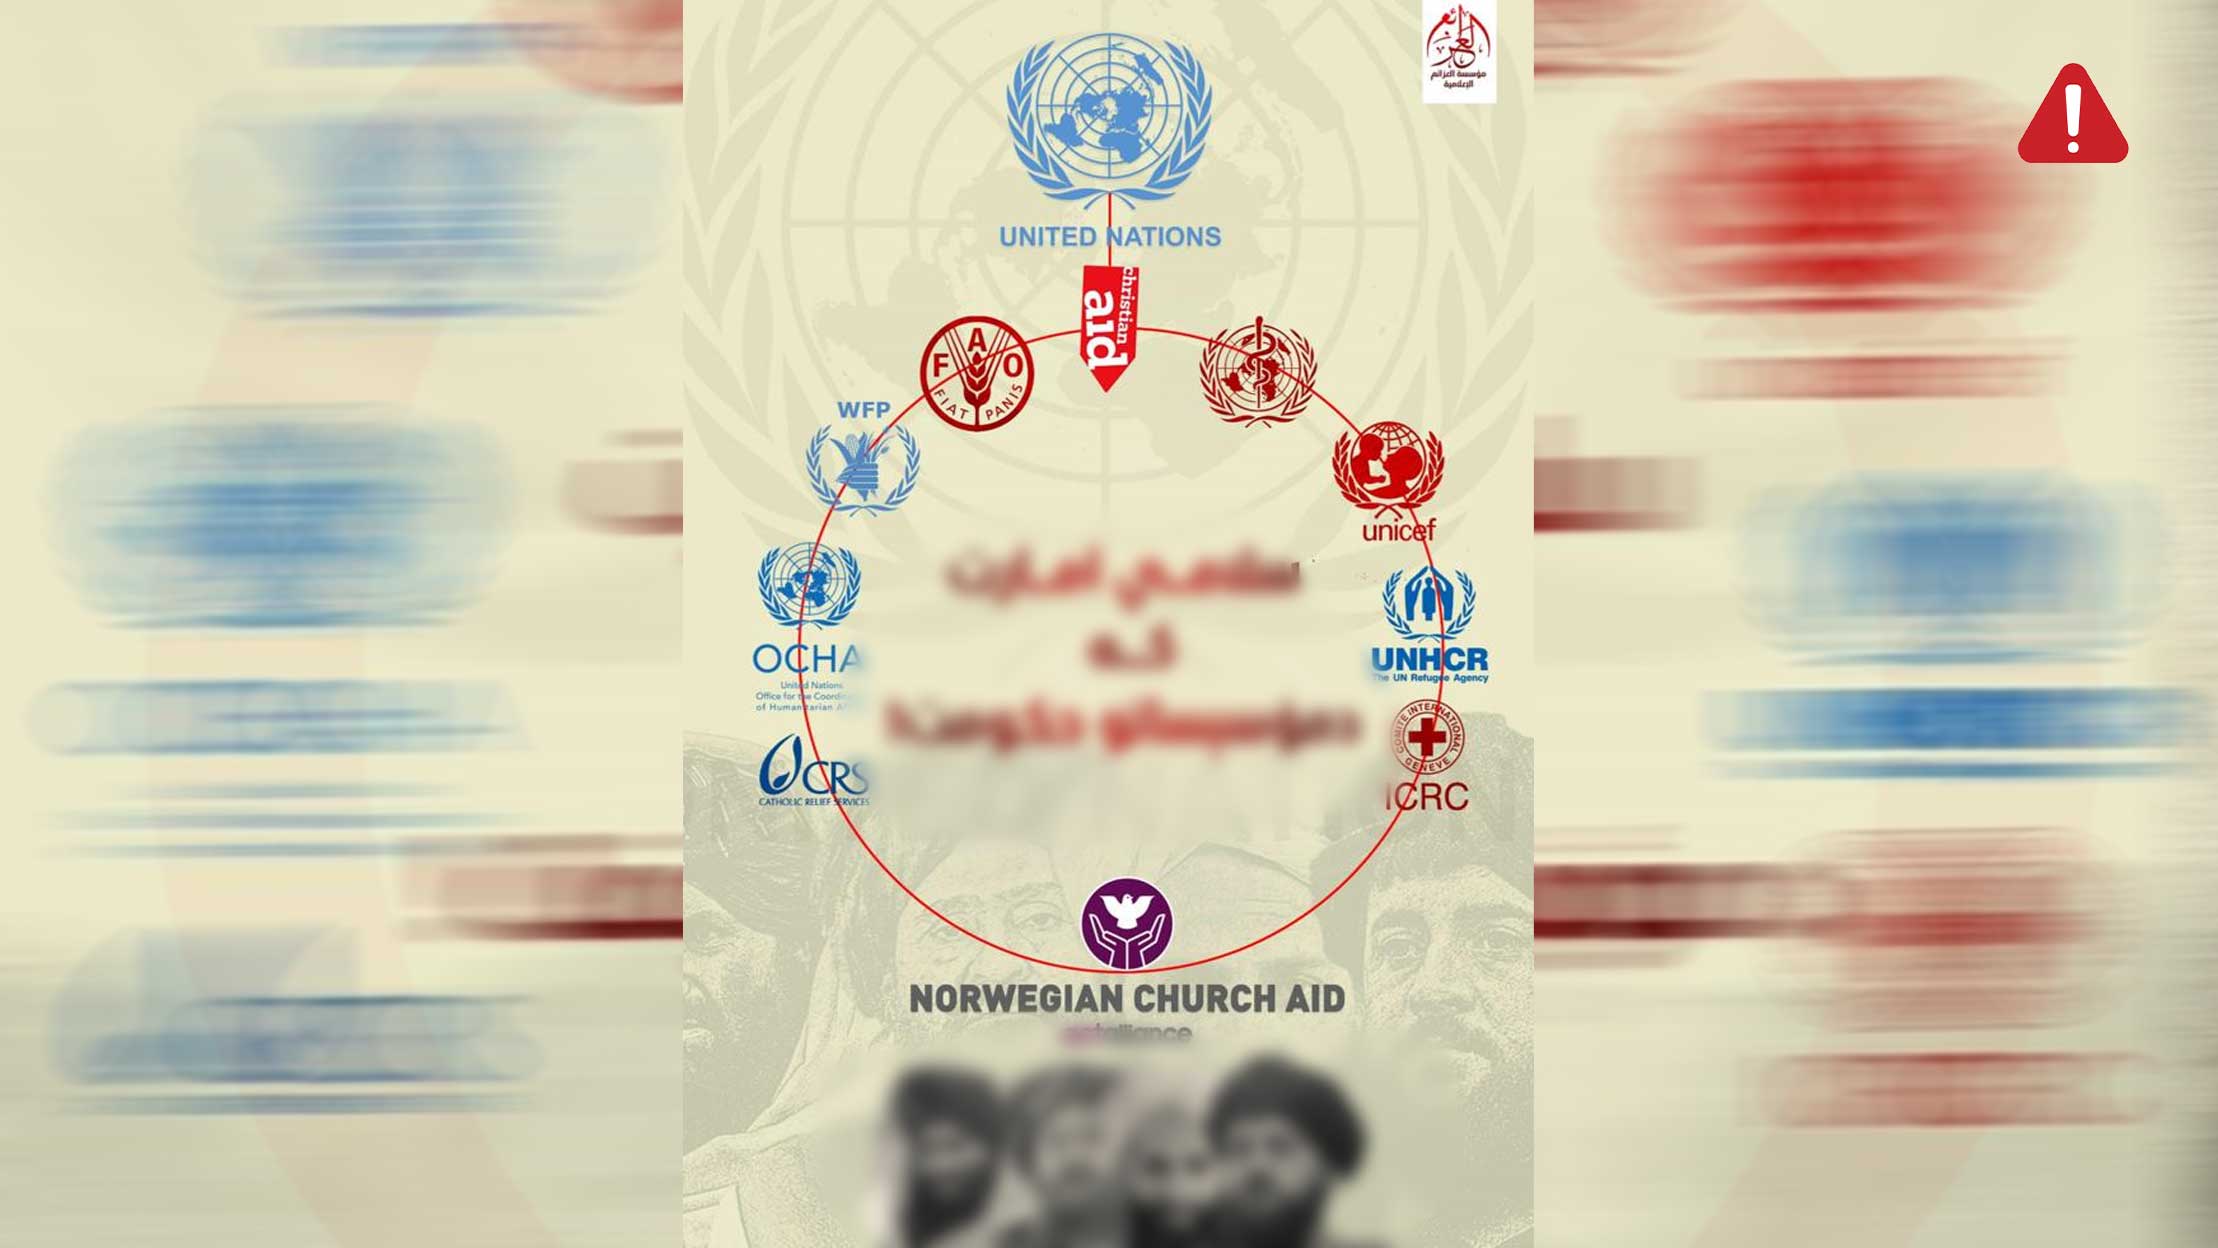 TKD MONITORING: New ISKP Book Criticises International Aid Organisations in Afghanistan